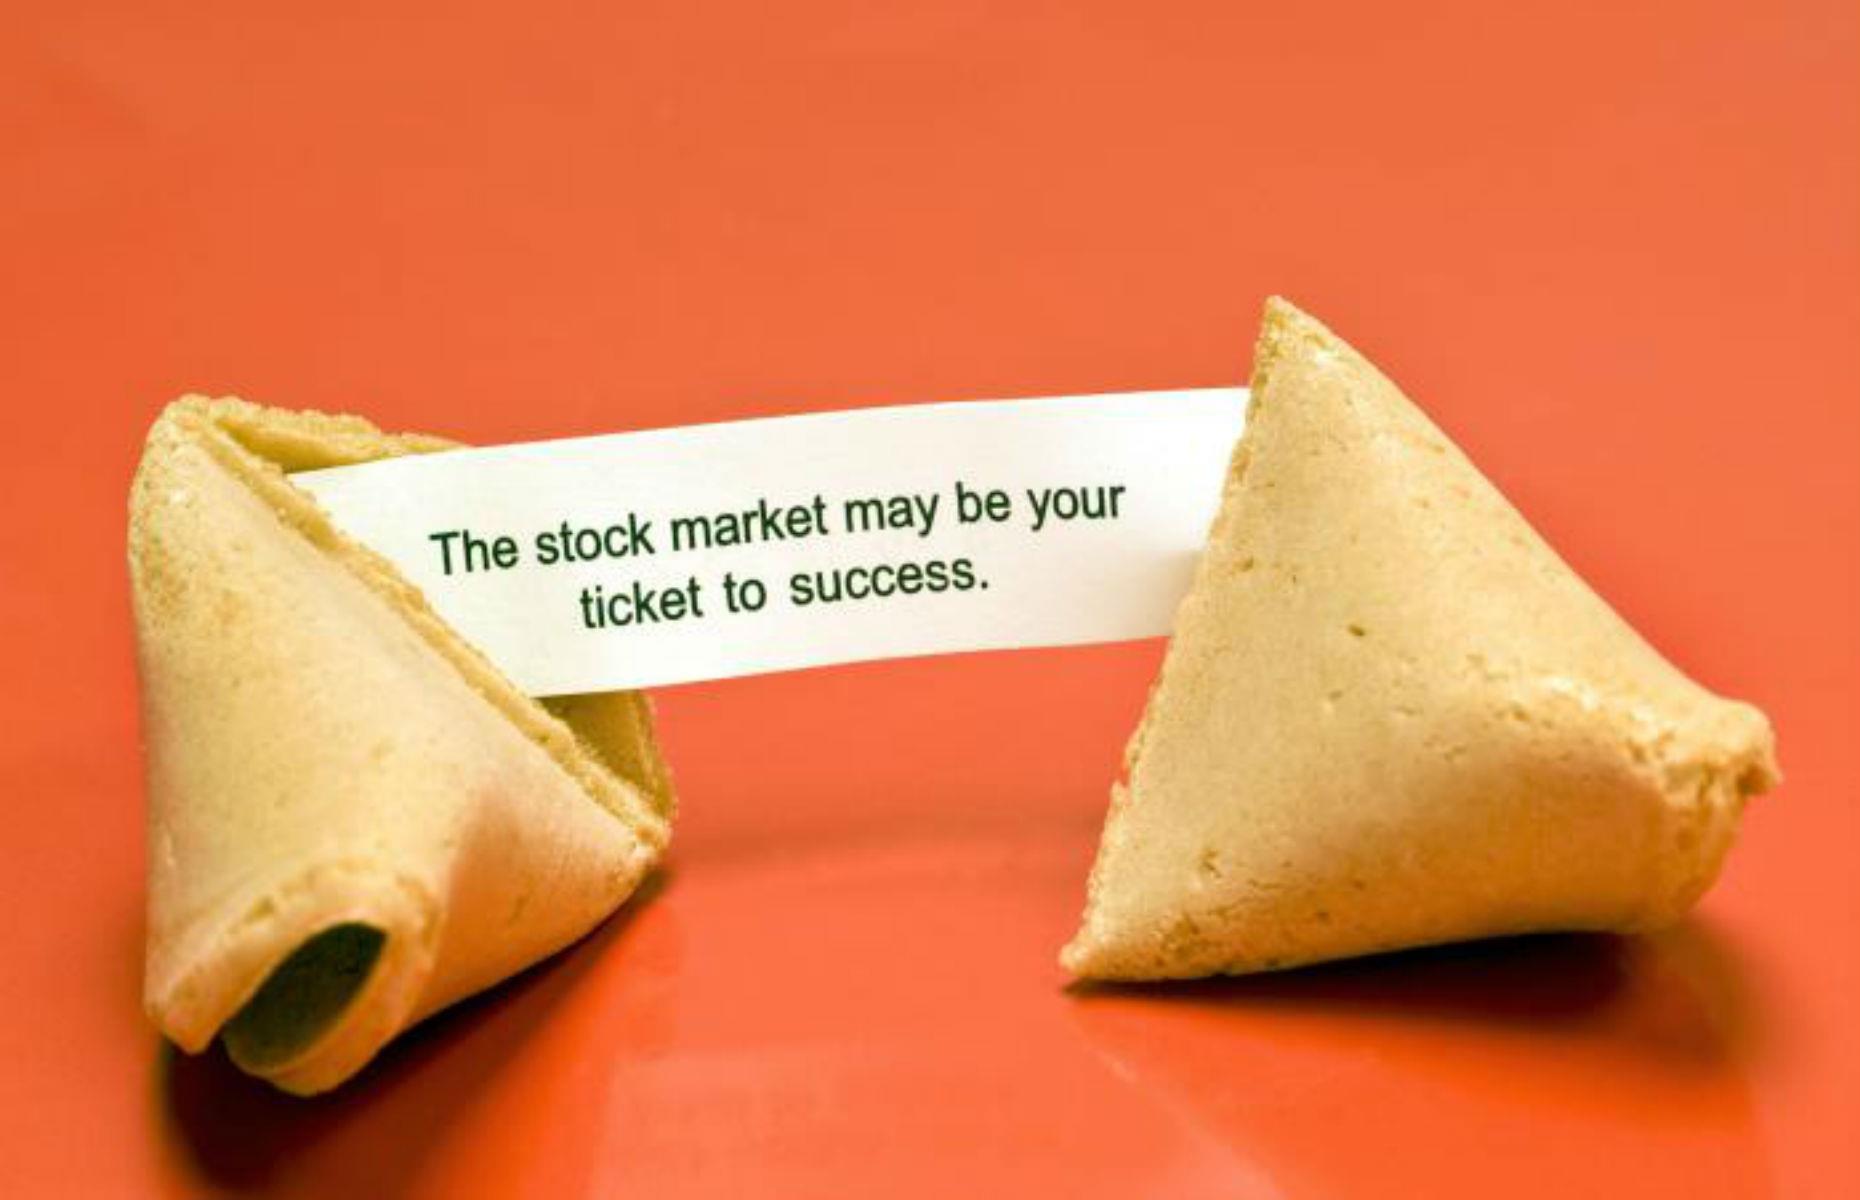 Fortune cookie writers